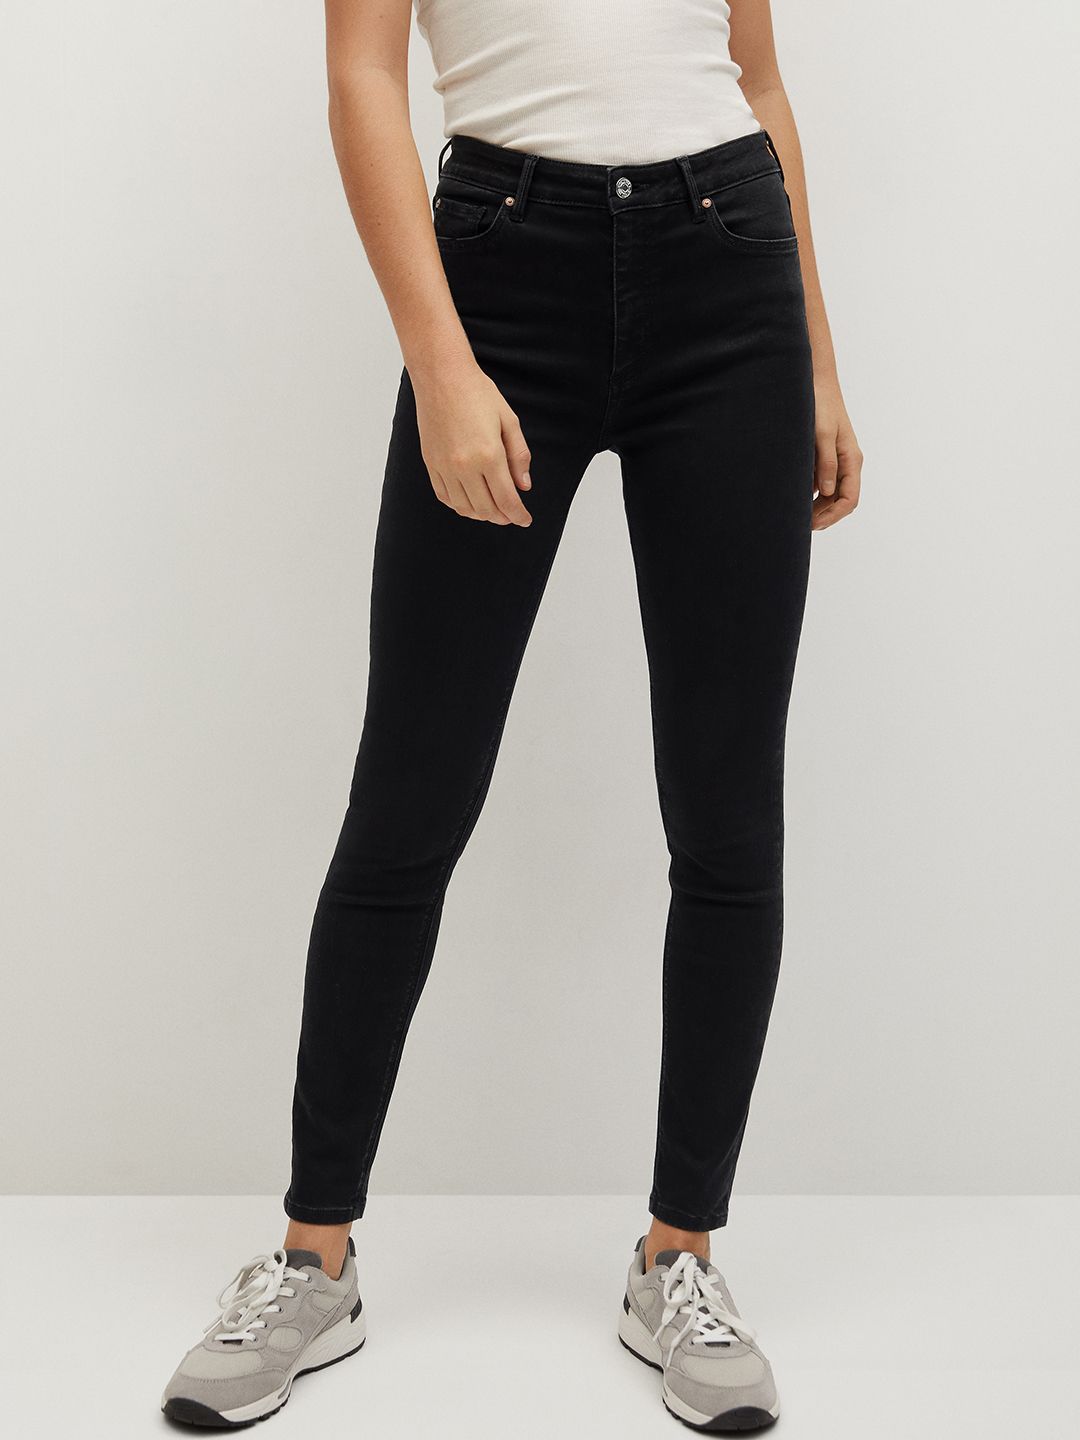 MANGO Women Black Skinny Fit High-Rise Stretchable Jeans Price in India